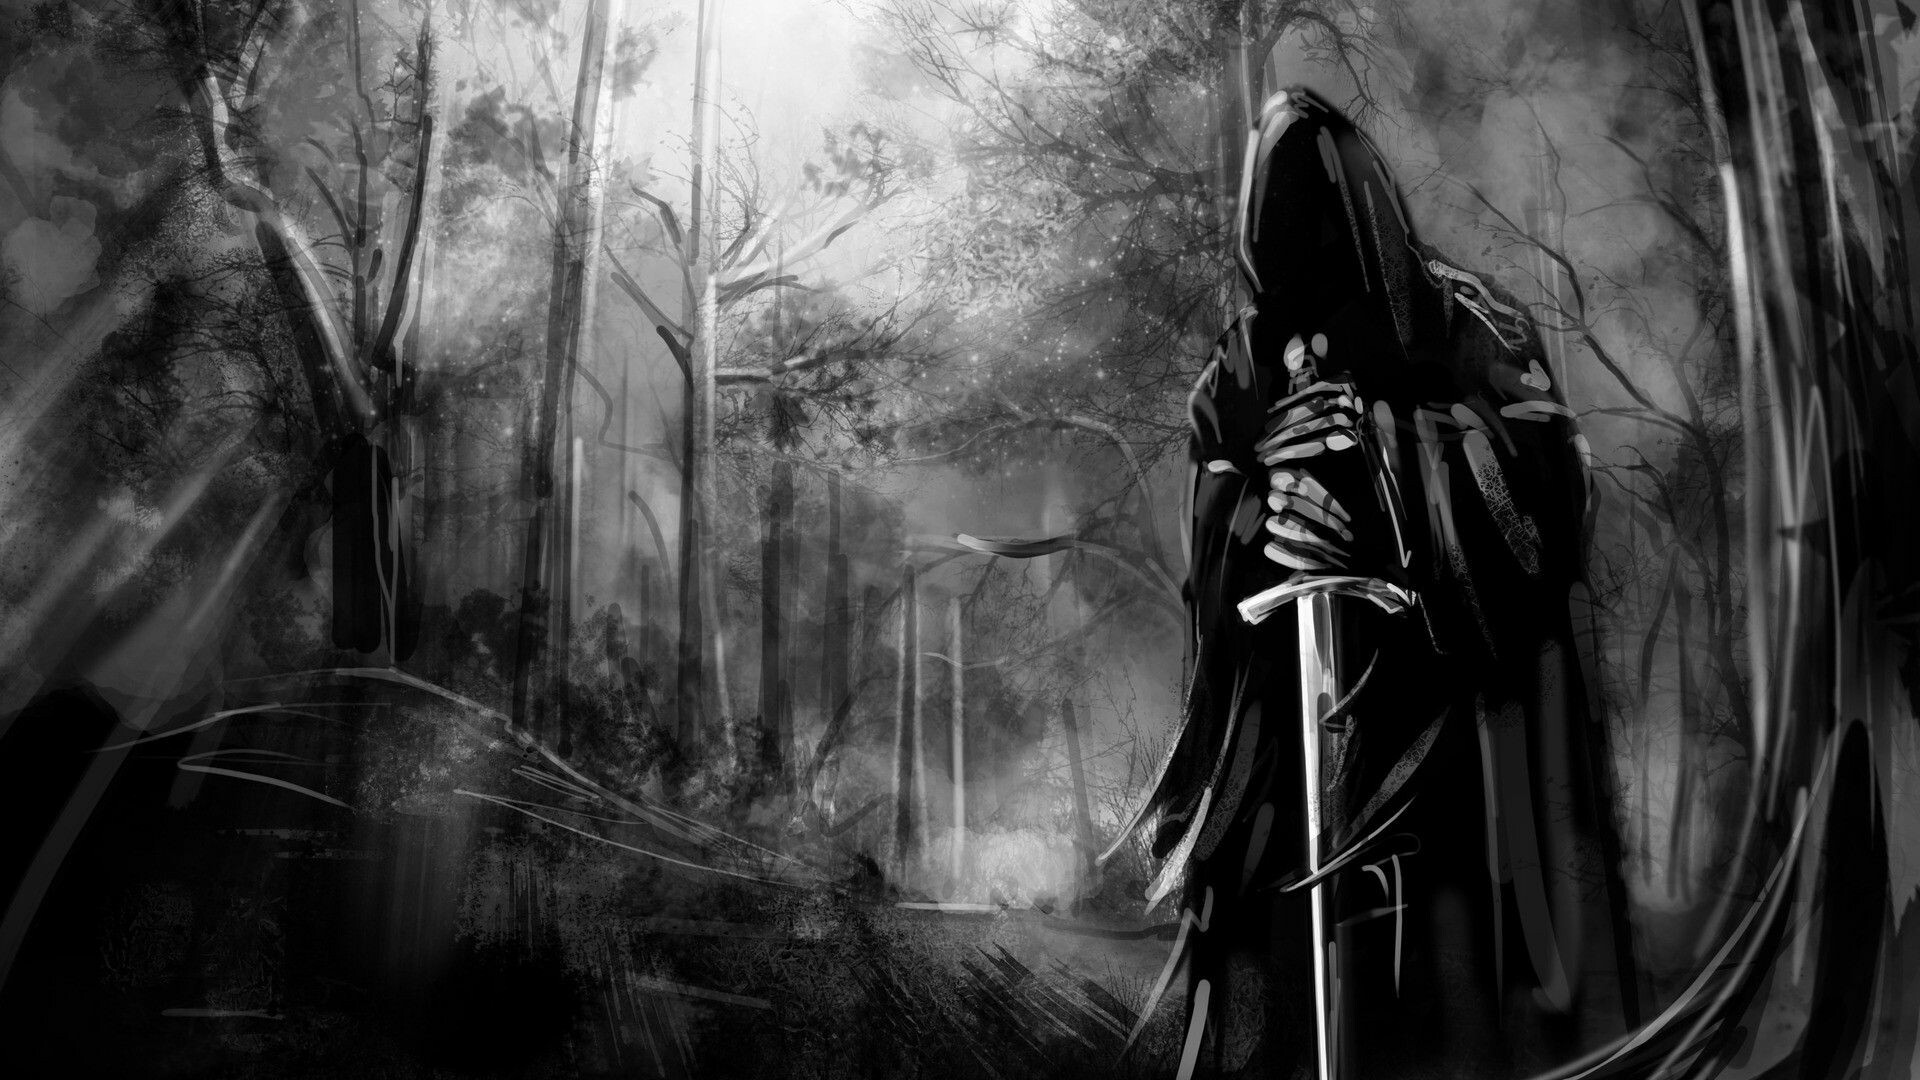 The Lord of the Rings: Epic fantasy, LOTR, Monochrome. 1920x1080 Full HD Wallpaper.